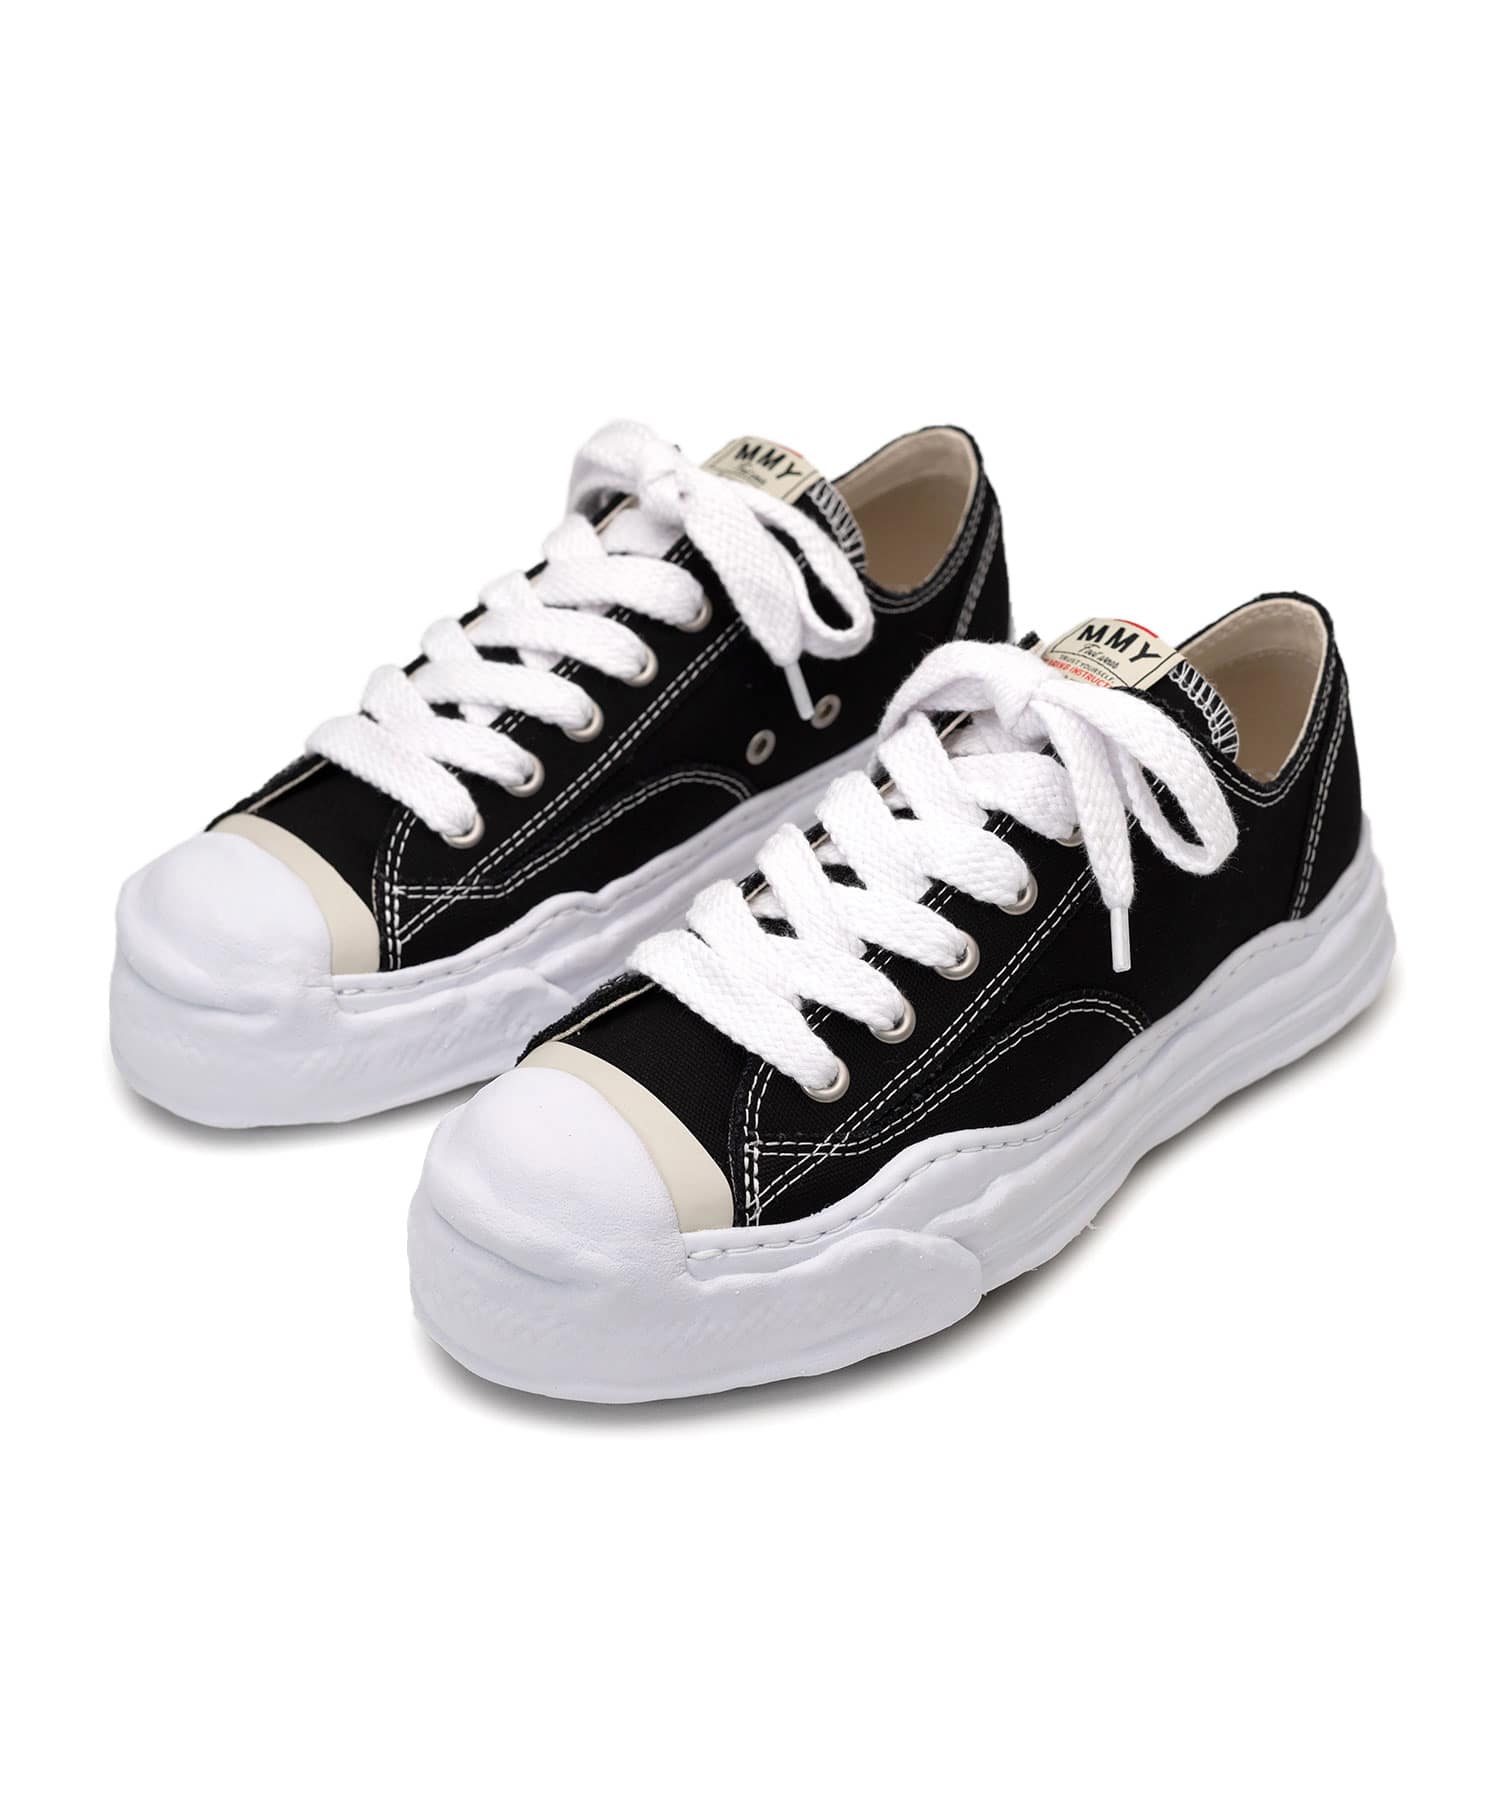 HANK LOW  oroginal sole canvas low top sneakers